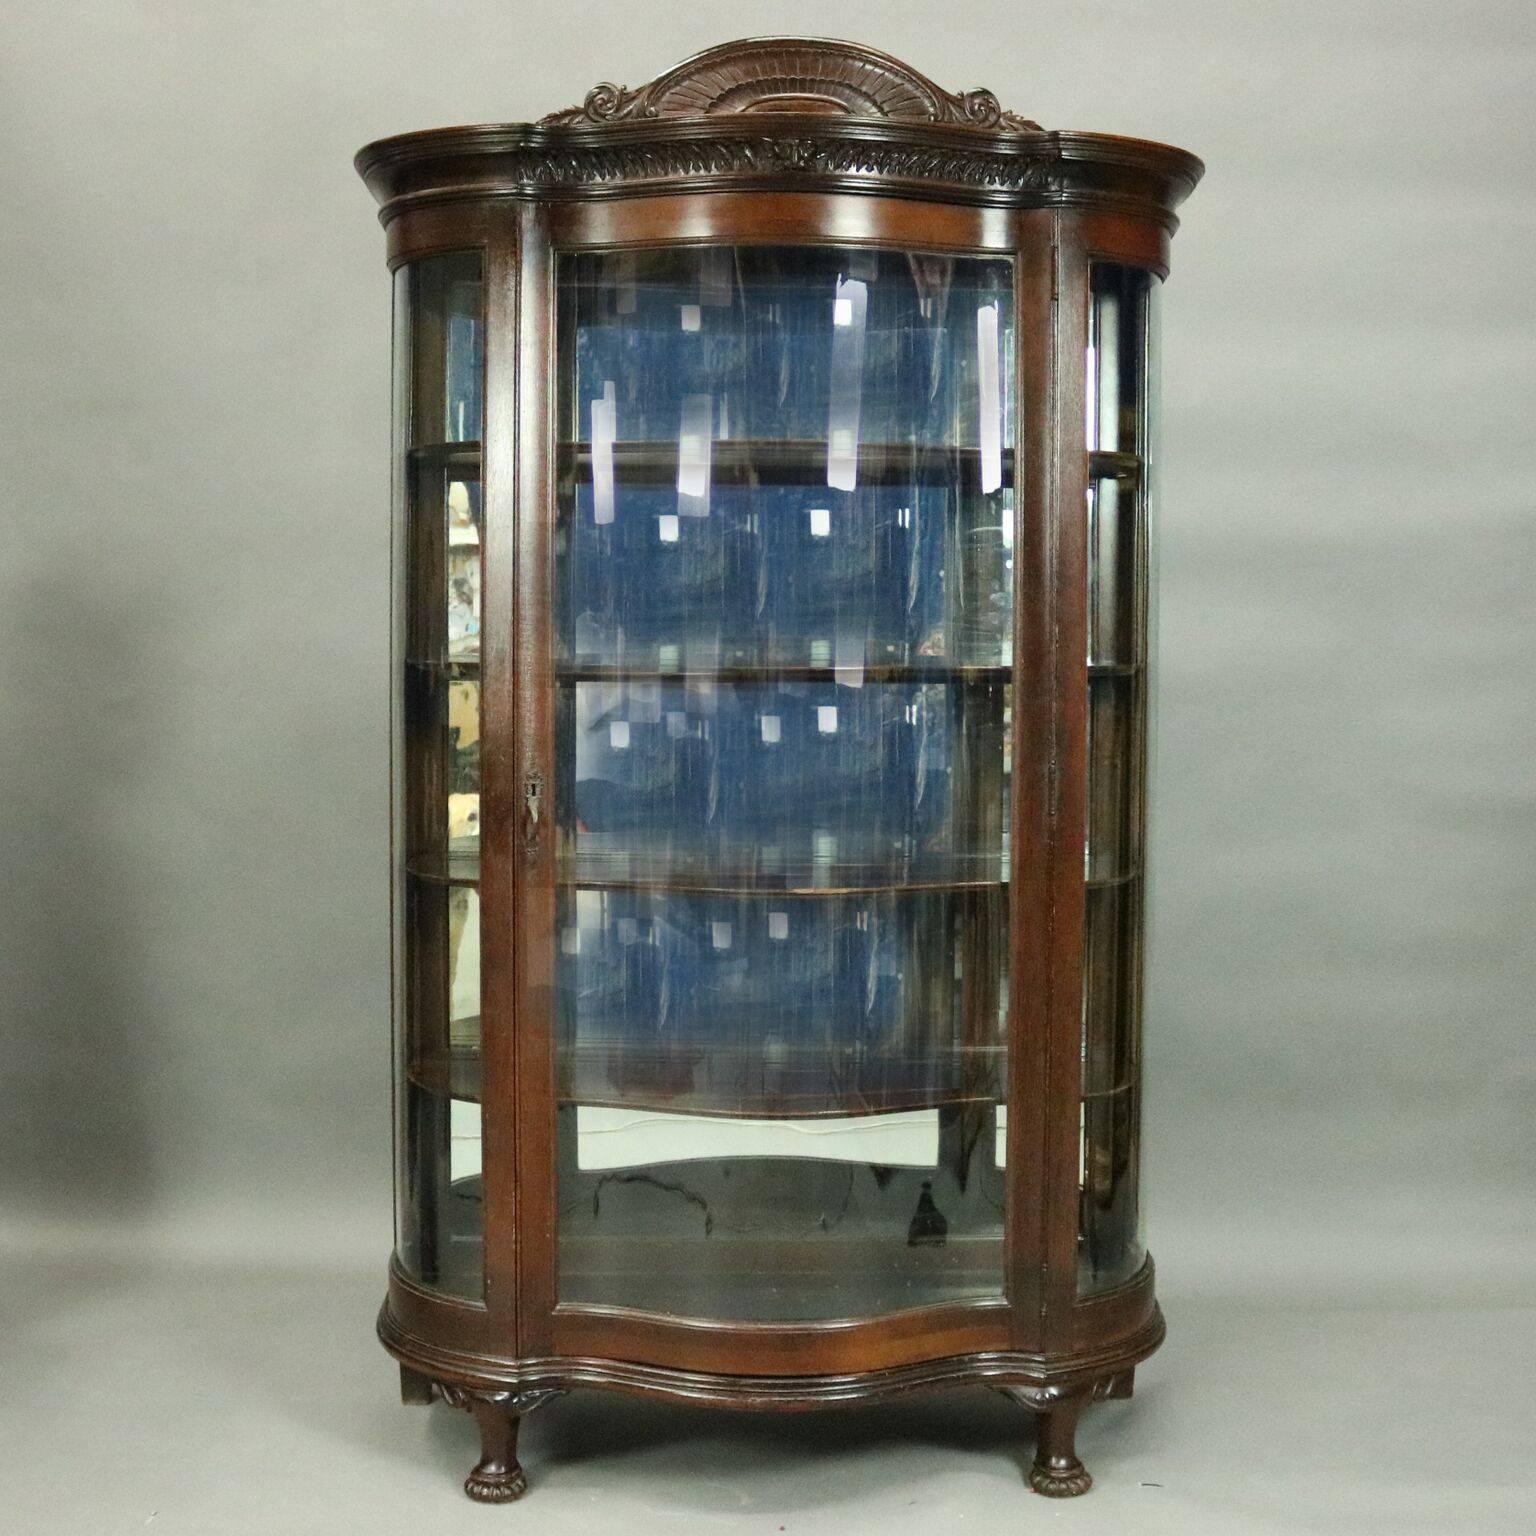 Antique dark stained oak Horner Bros. china cabinet features curved glass door and sides, carved molding and crest with figural mask, mirror back interior with four shelves, case seated on paw feet, circa 1900

Measures - 63.25" H x 47"